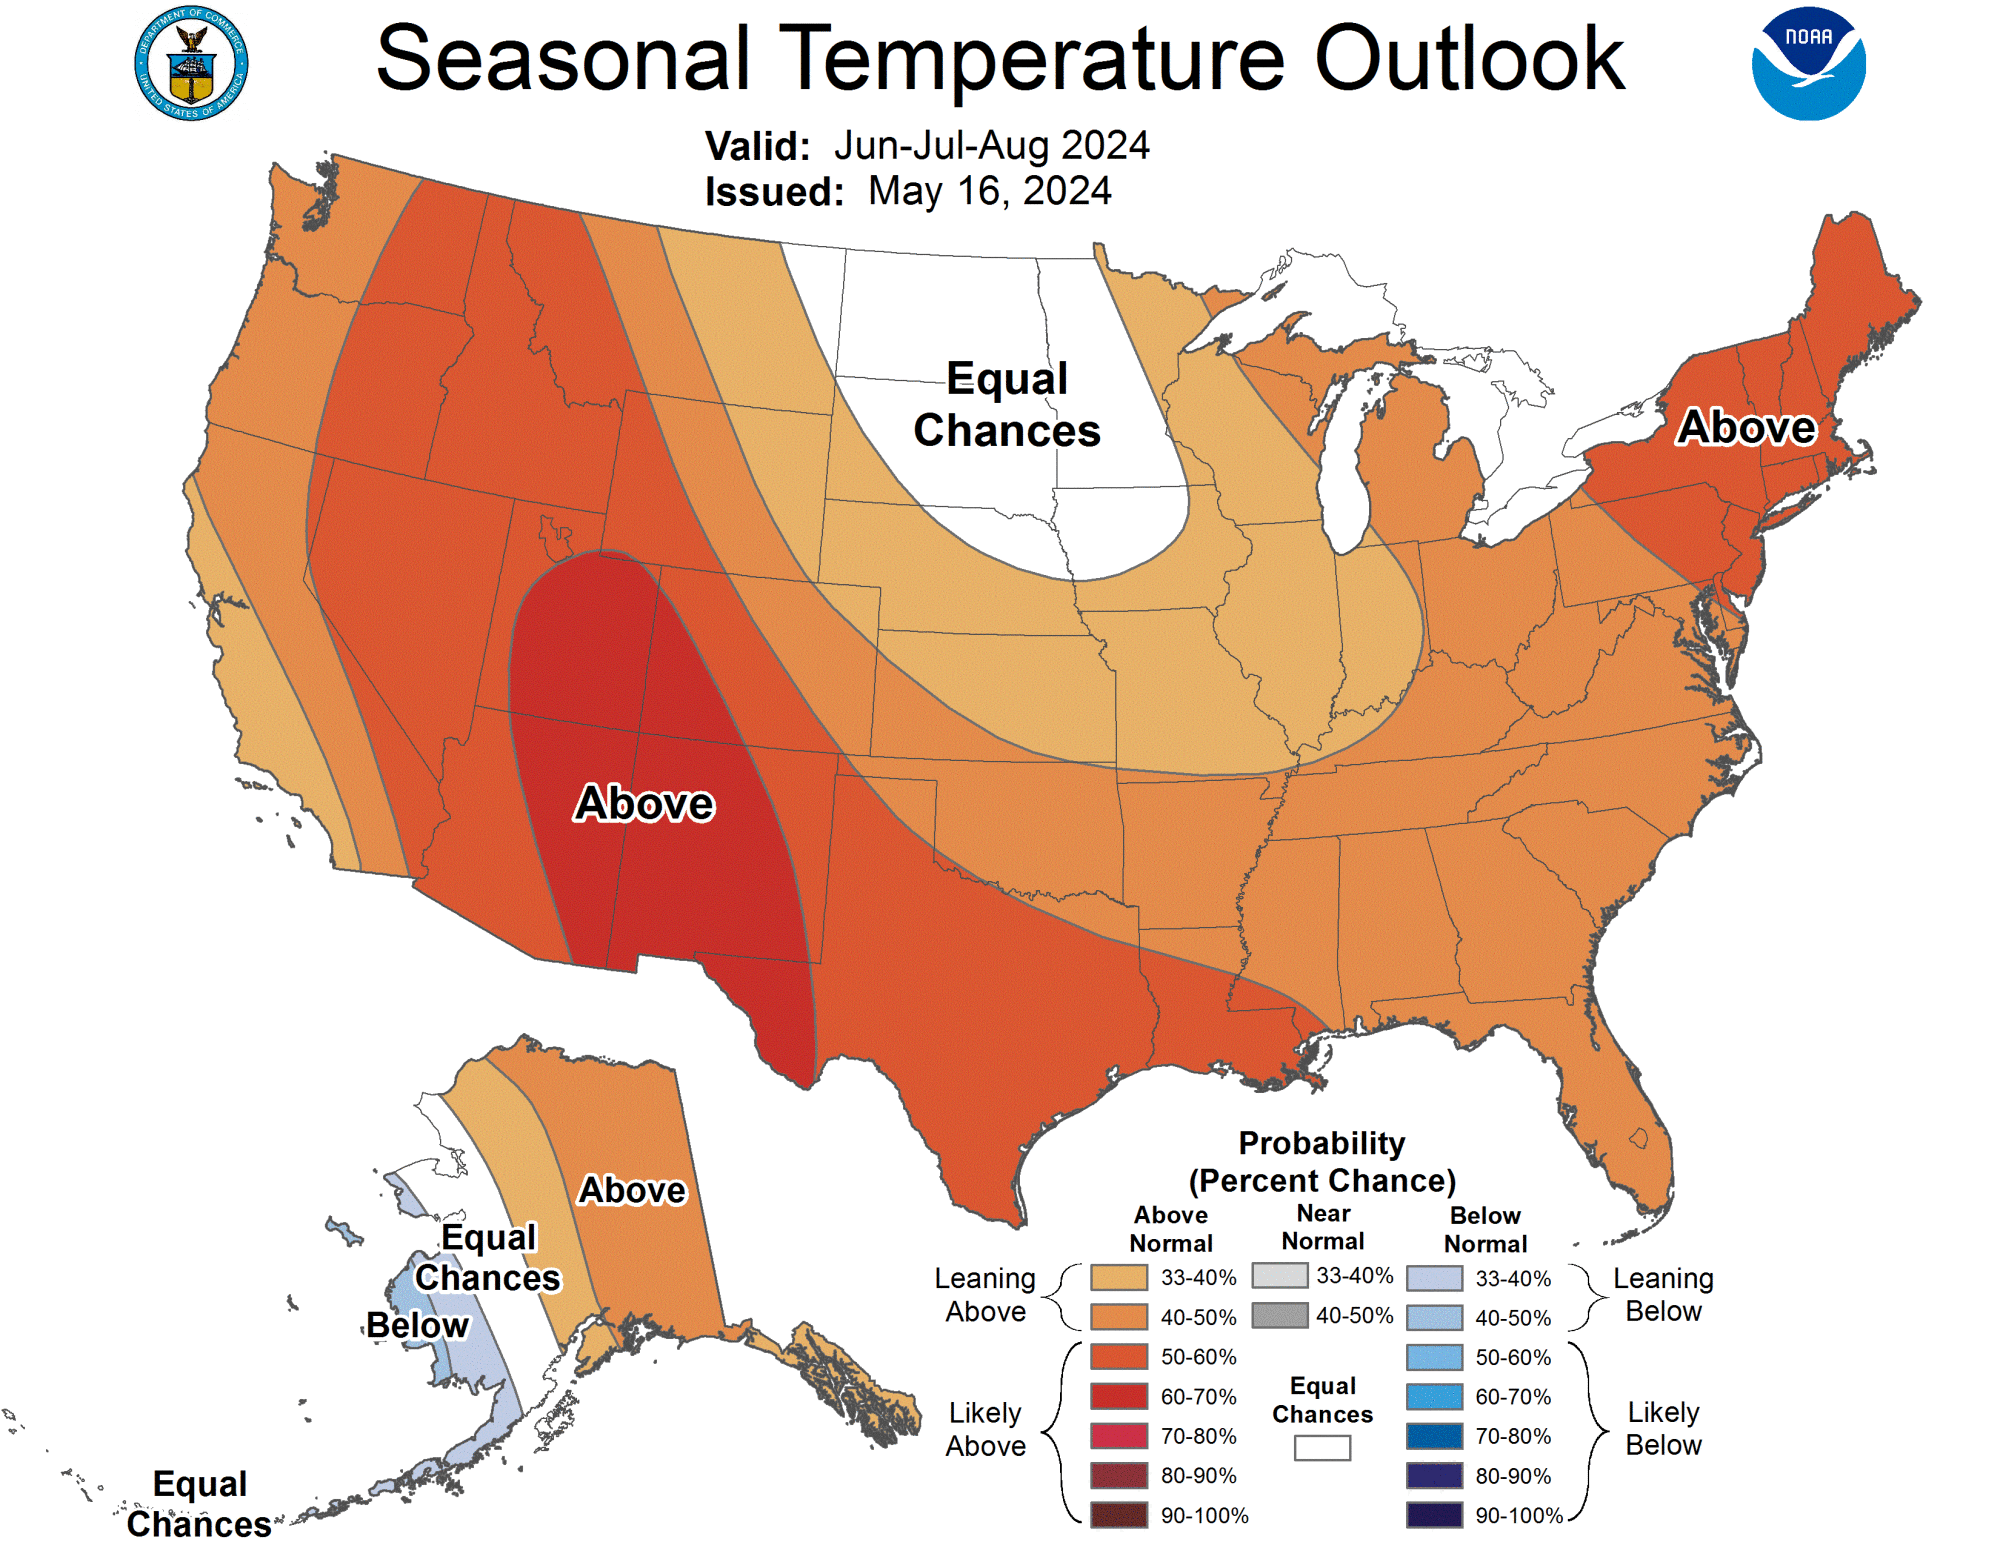 A seasonal outlook indicates a high likelihood of warmer-than-normal temperatures in June, July and August.